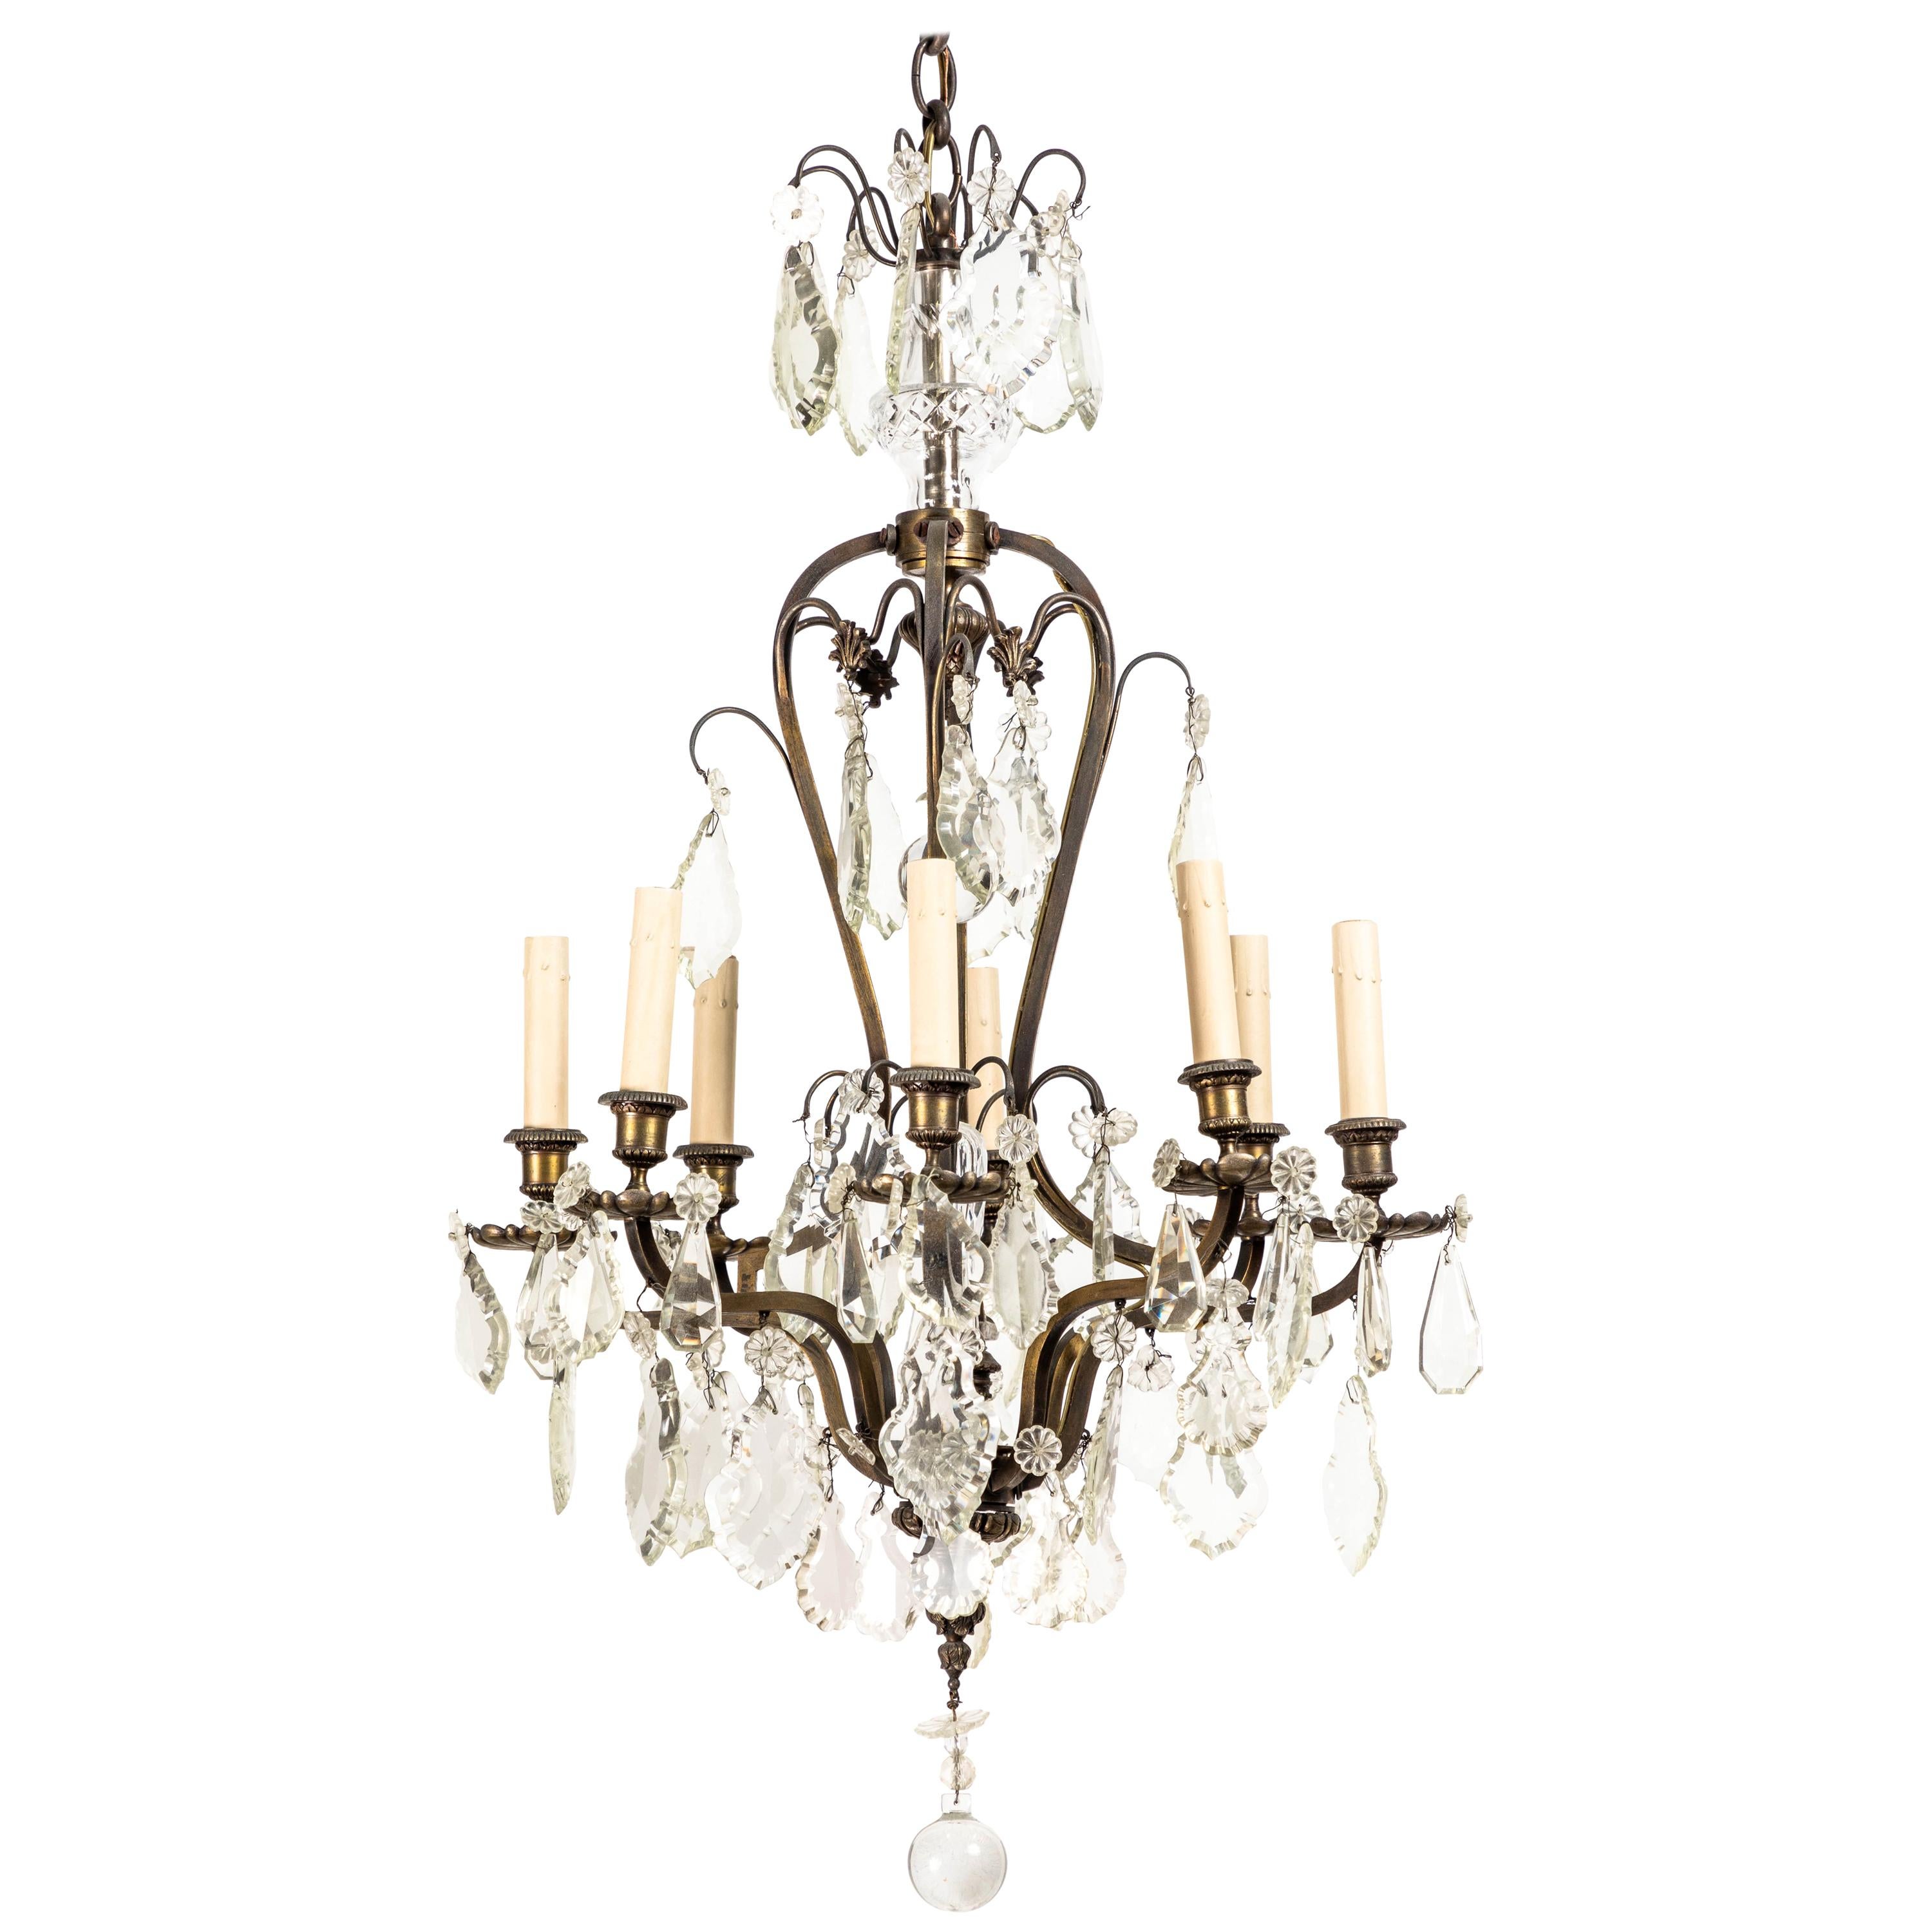 19th Century French Rococo Style Bronze 8-Light Chandelier with Handcut Crystals